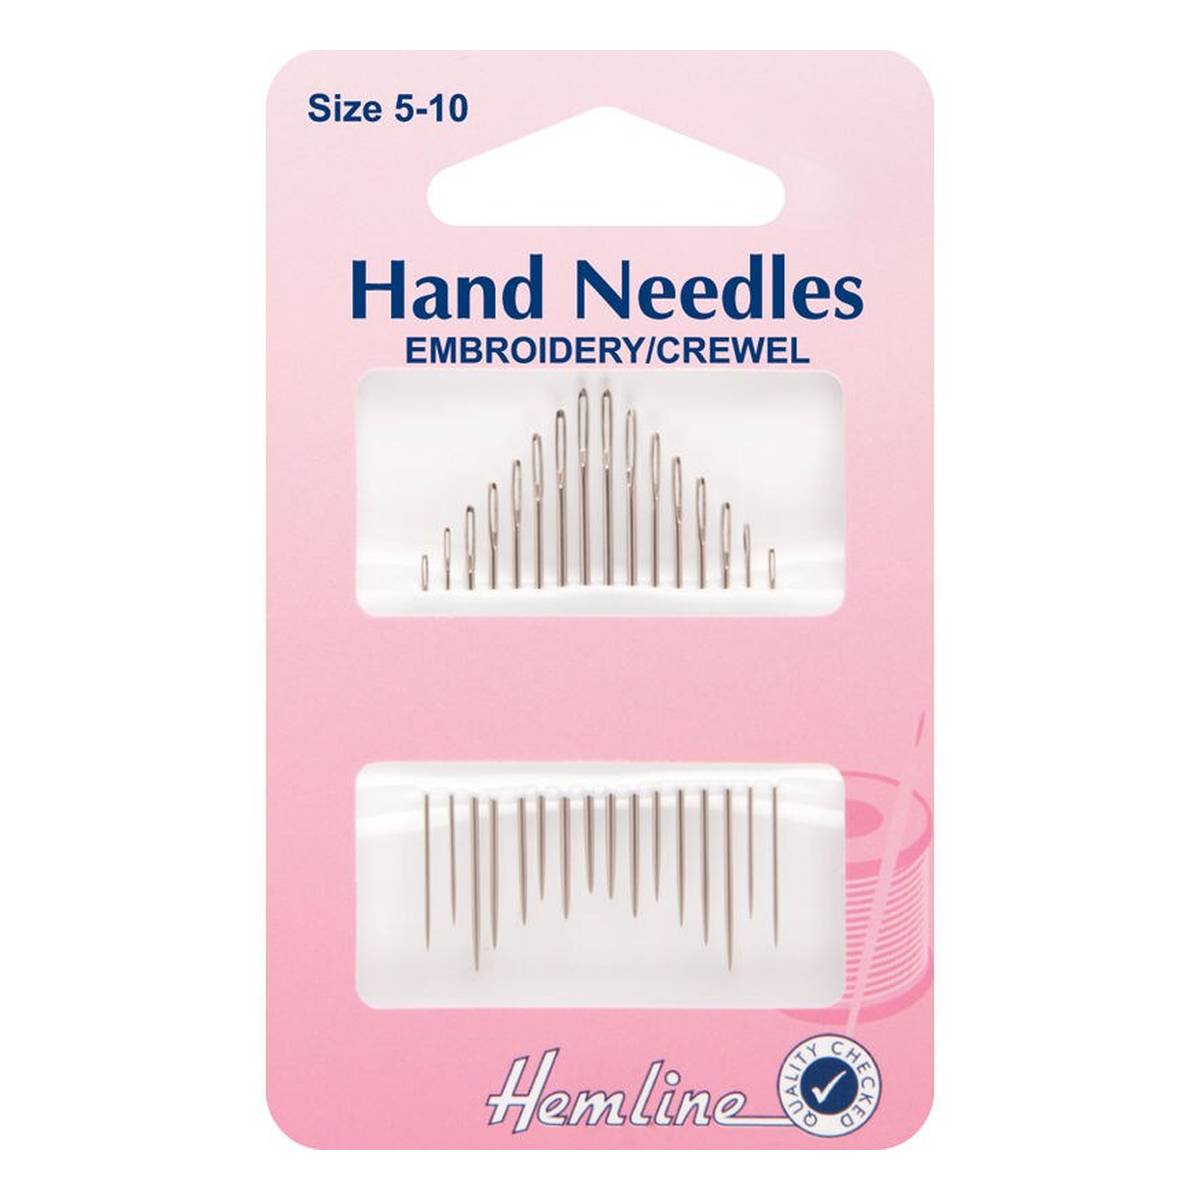 Hemline Size 5 to 10 Embroidery Crewel Needles 16 Pack